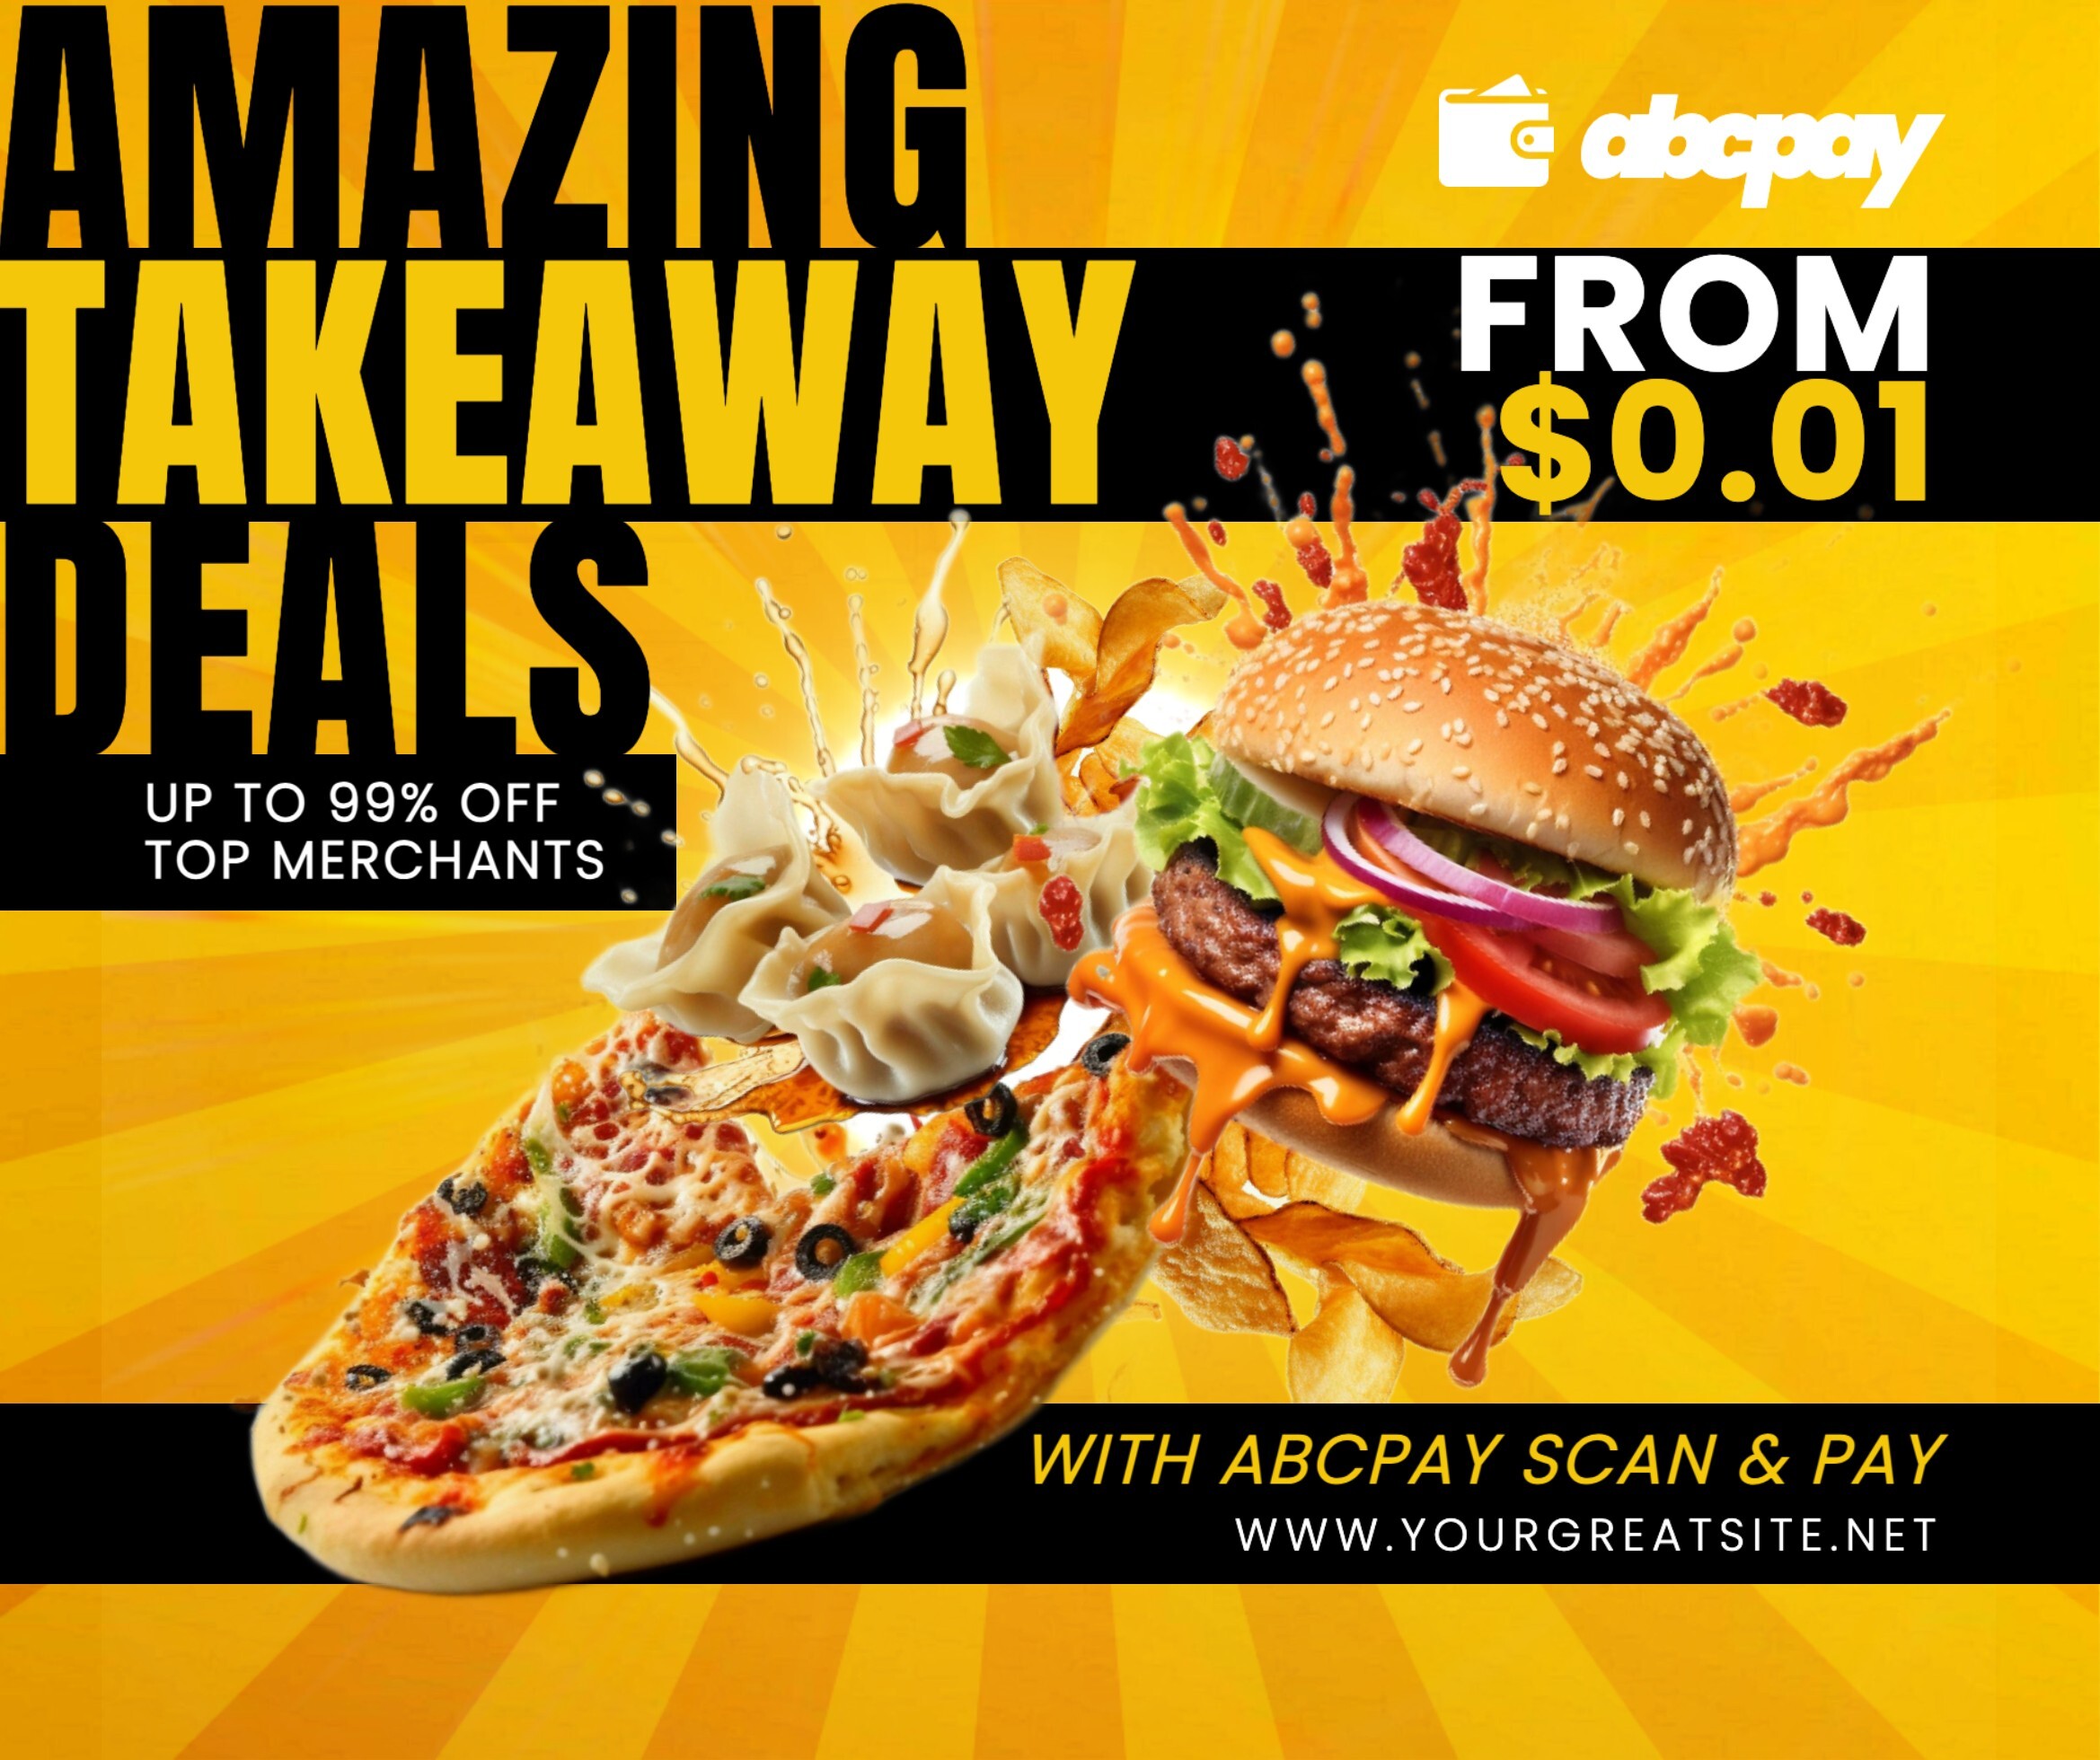 Amazing Takeaway Deals on Food Promotion Ad for Facebook Post